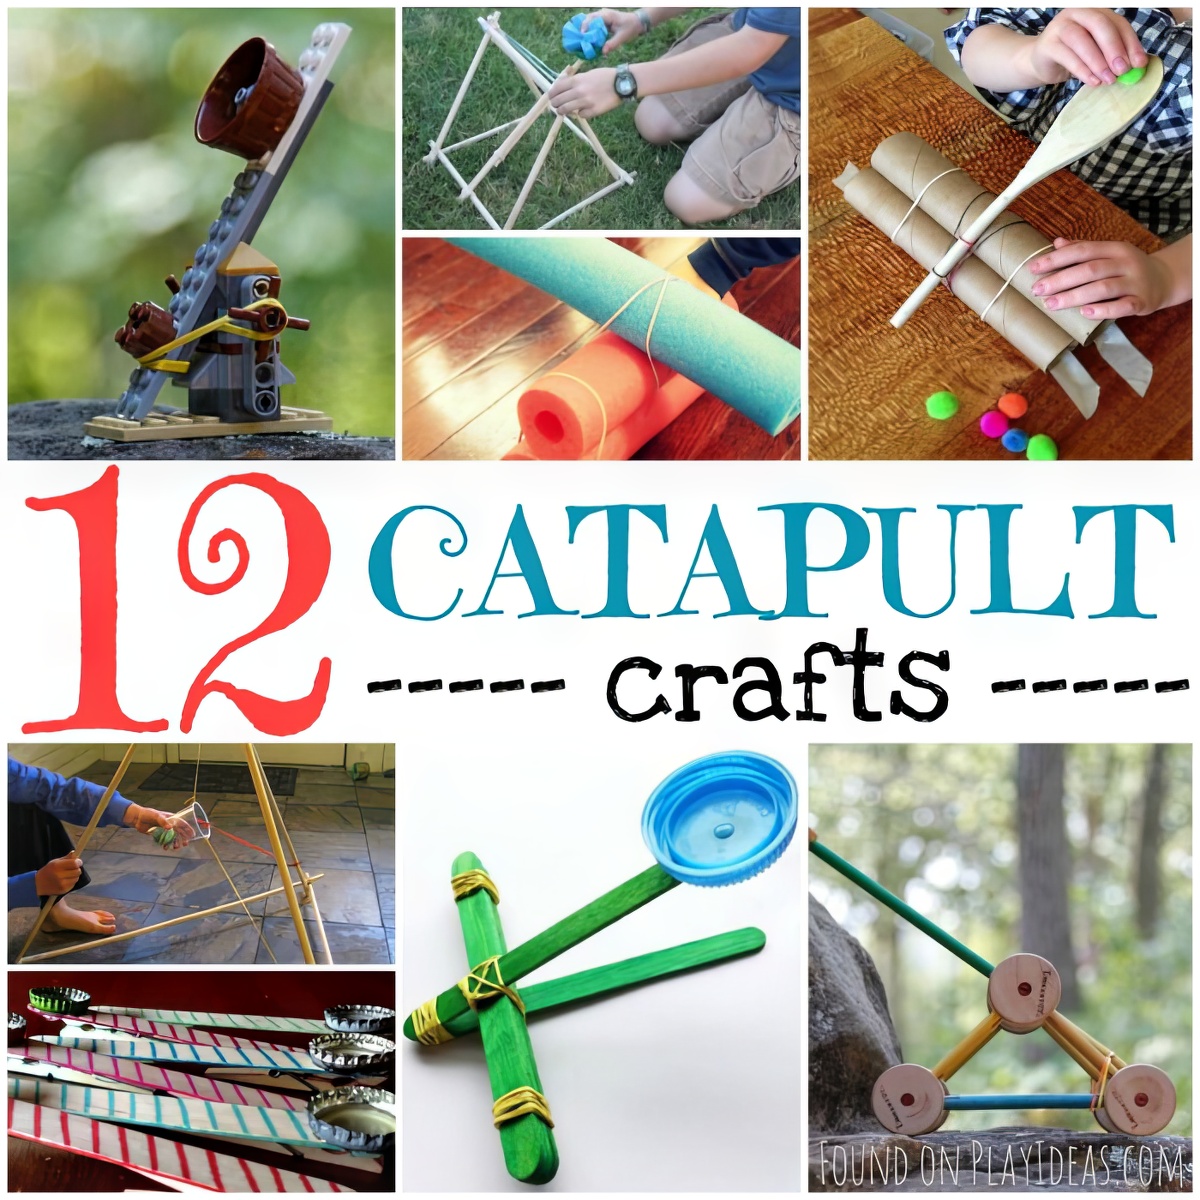 Catapult Crafts Blog Image, 12 catapult crafts for kids of all ages